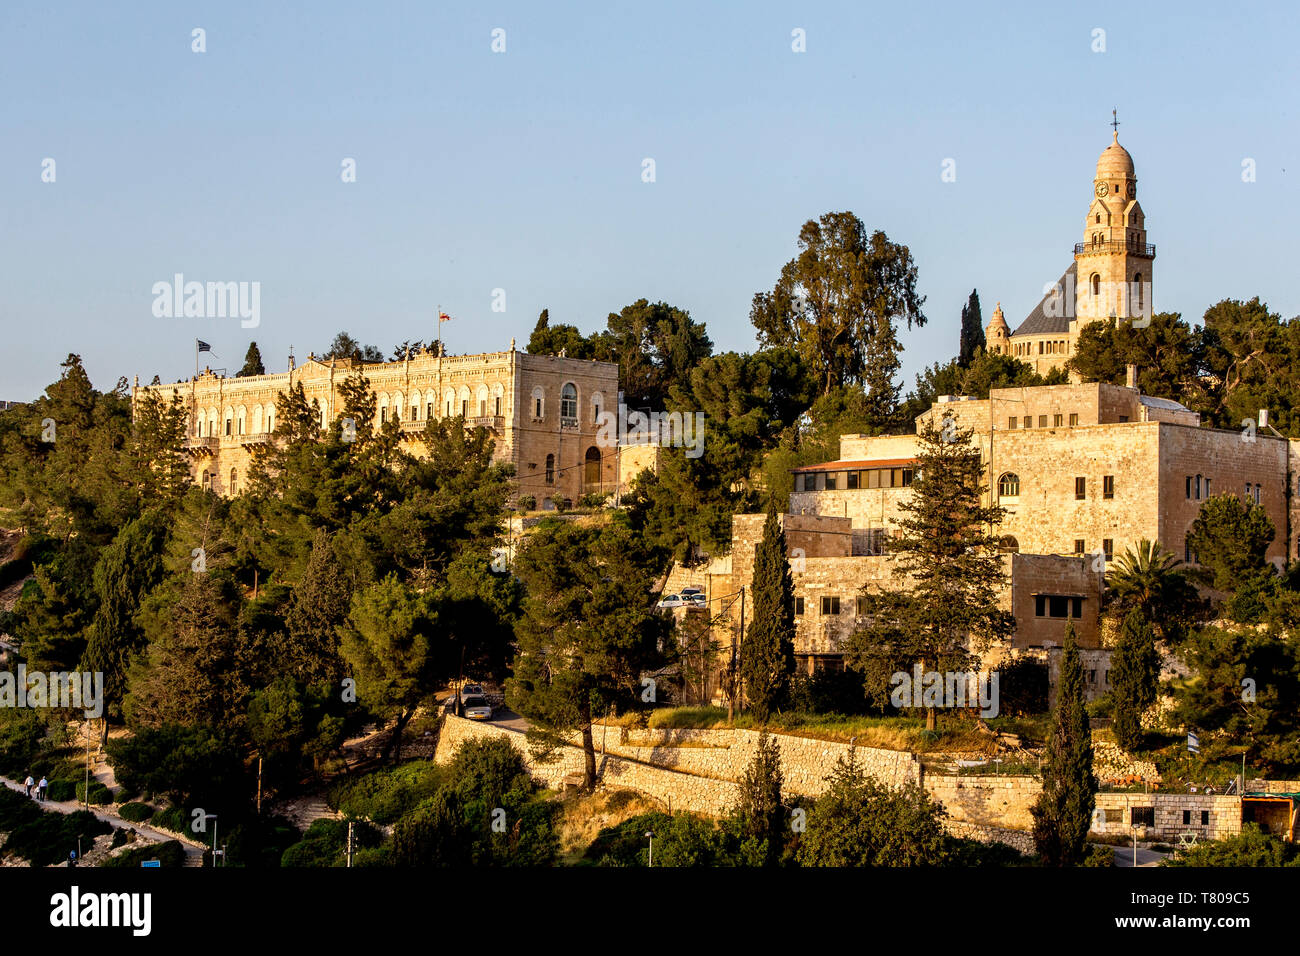 Area around the Dormition Abbey on Mount Zion, Jerusalem, Israel, Middle East Stock Photo